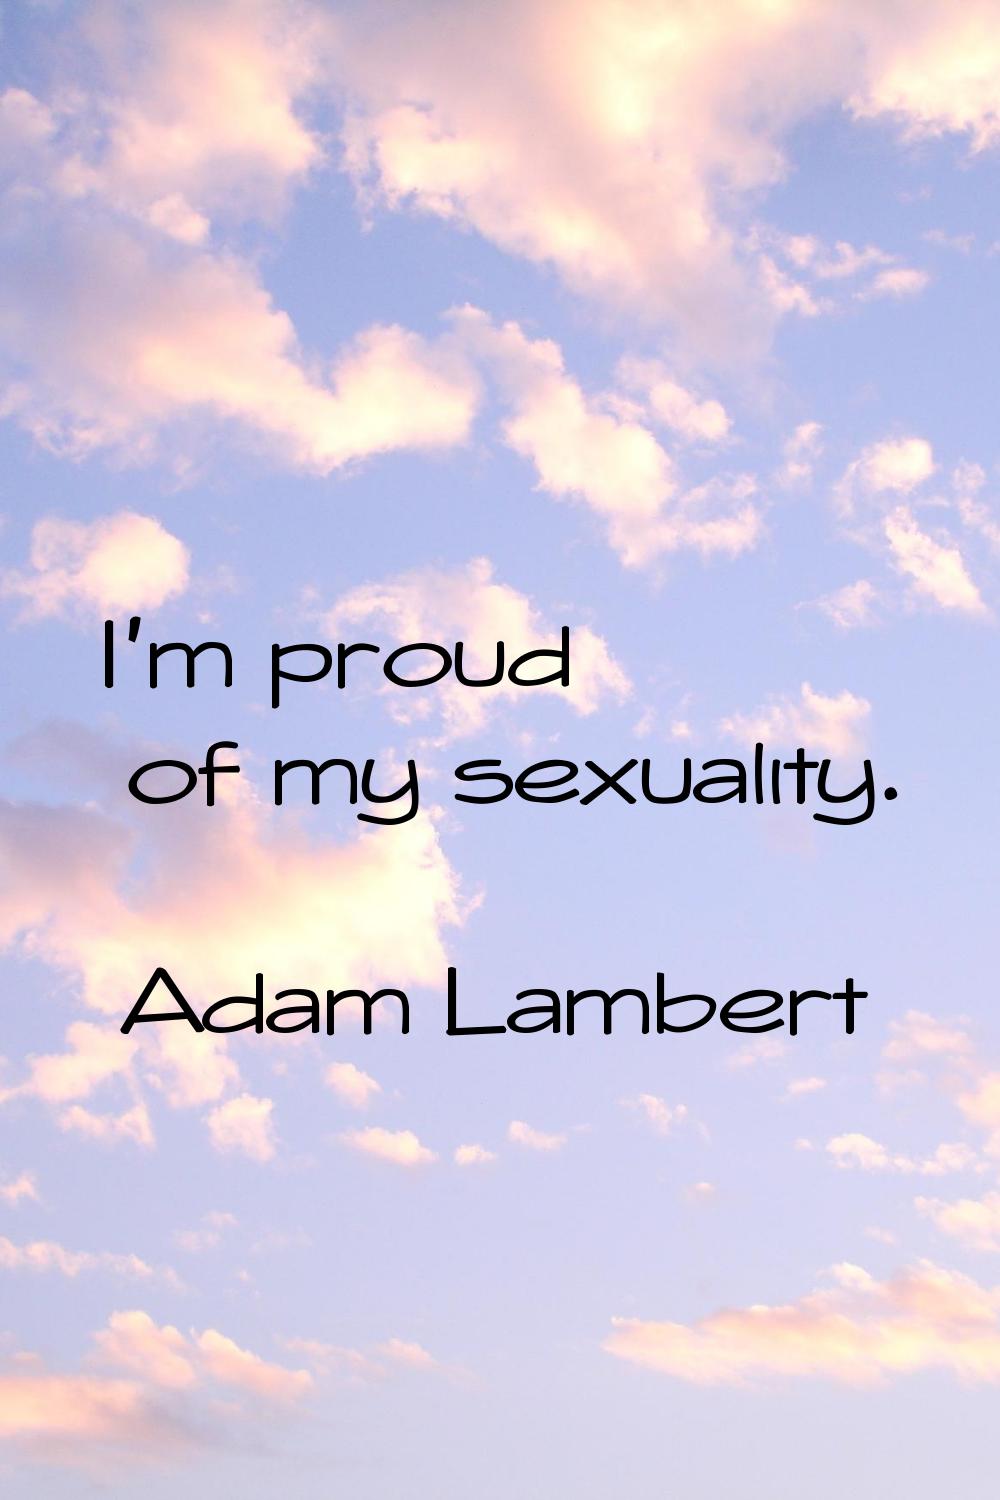 I'm proud of my sexuality.